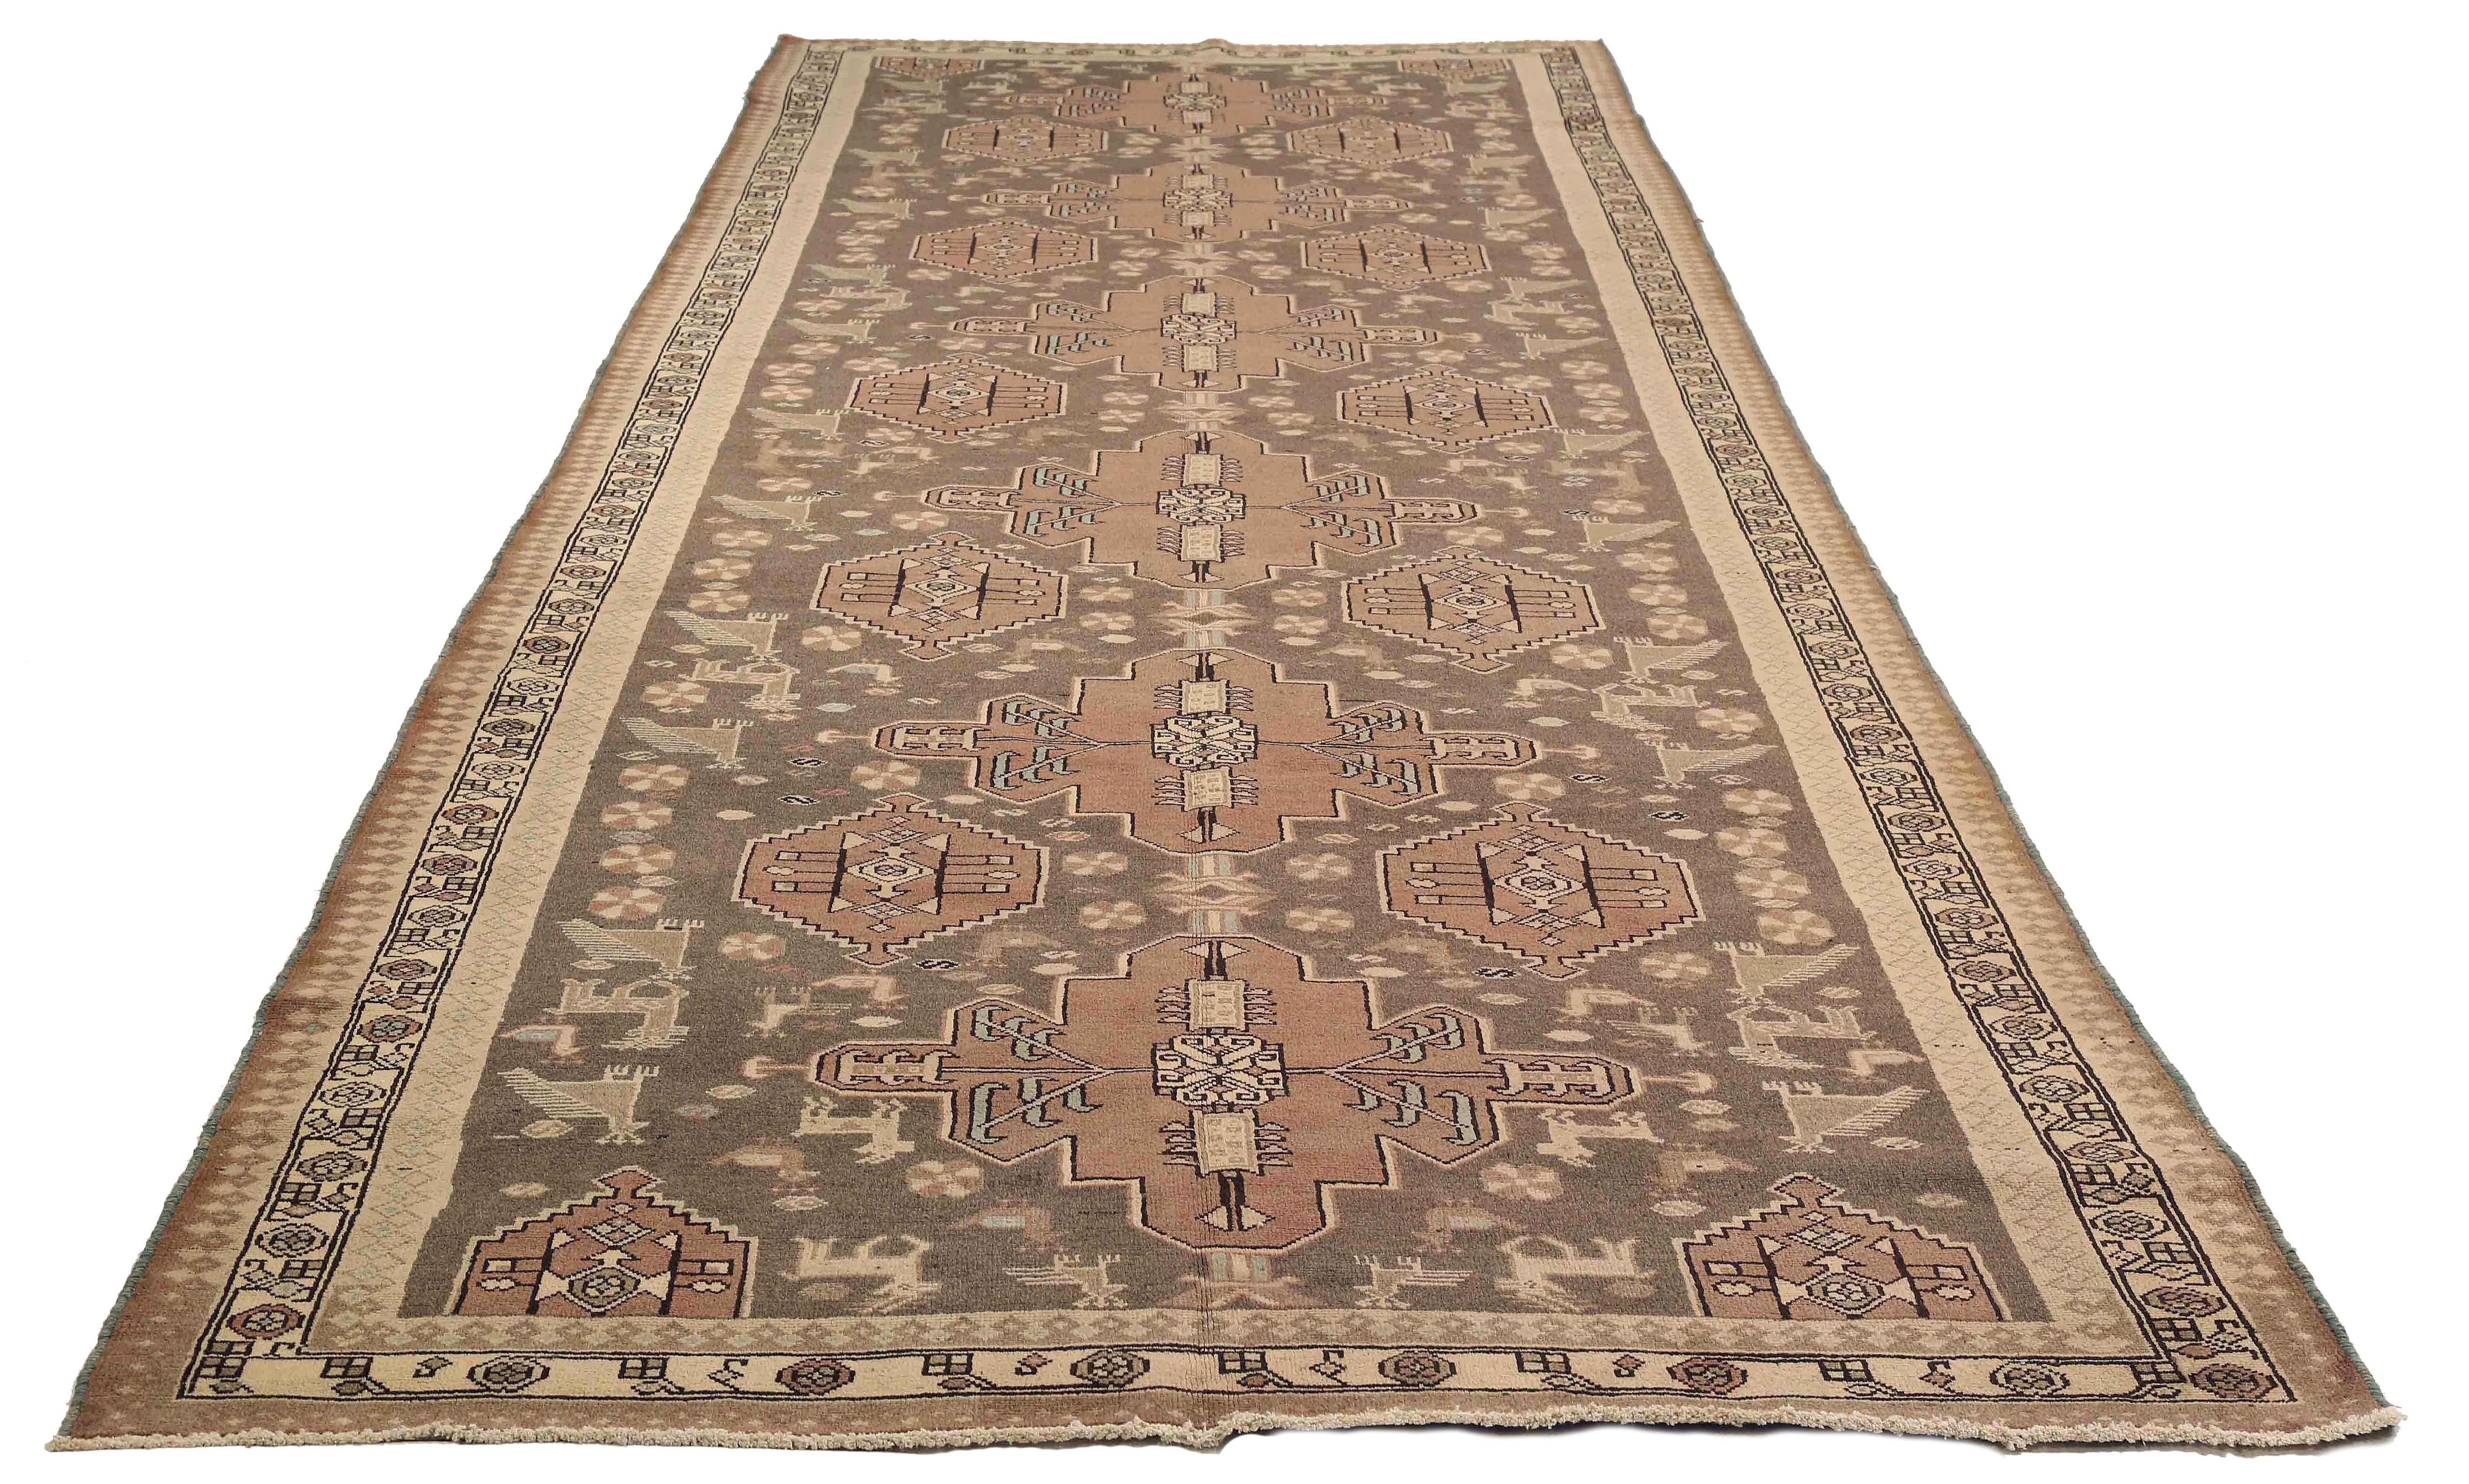 Antique Persian rug handwoven from the finest sheep’s wool. It’s colored with all-natural vegetable dyes that are safe for humans and pets. It’s a traditional Malayer design featuring brown and black tribal details on a beige field. It’s a lovely